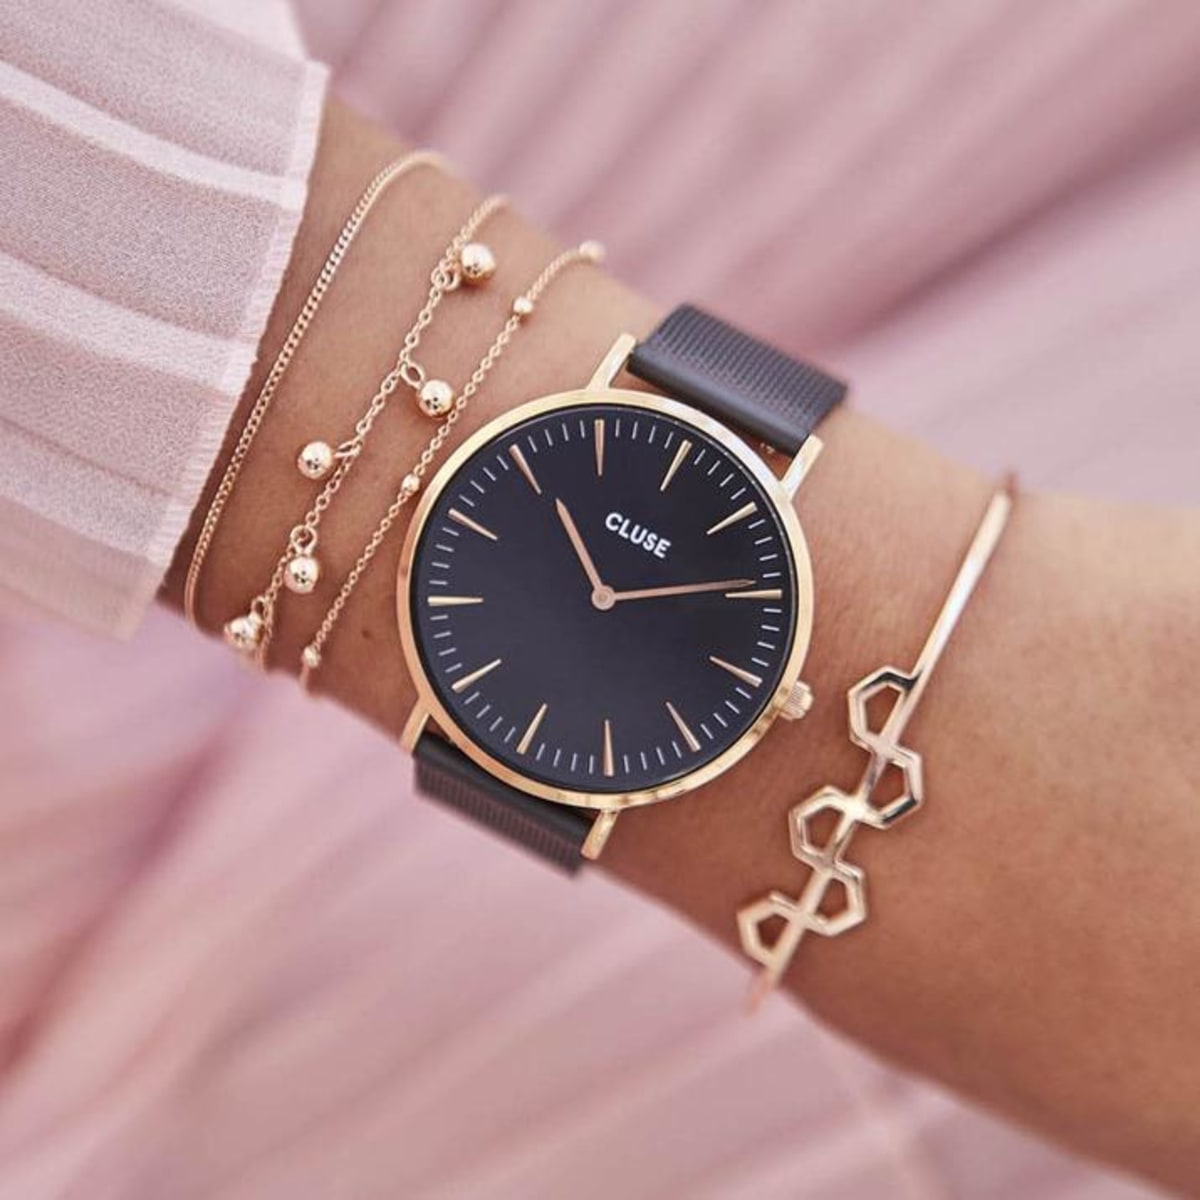 This Boho Chic Mesh model features an ultrathin case with a 38 mm diameter, crafted with precision for a sophisticated and elegant result. Black and rose gold are combined with a black mesh strap, detailed with a rose gold clasp. The strap can be easily interchanged, allowing you to personalise your watch.